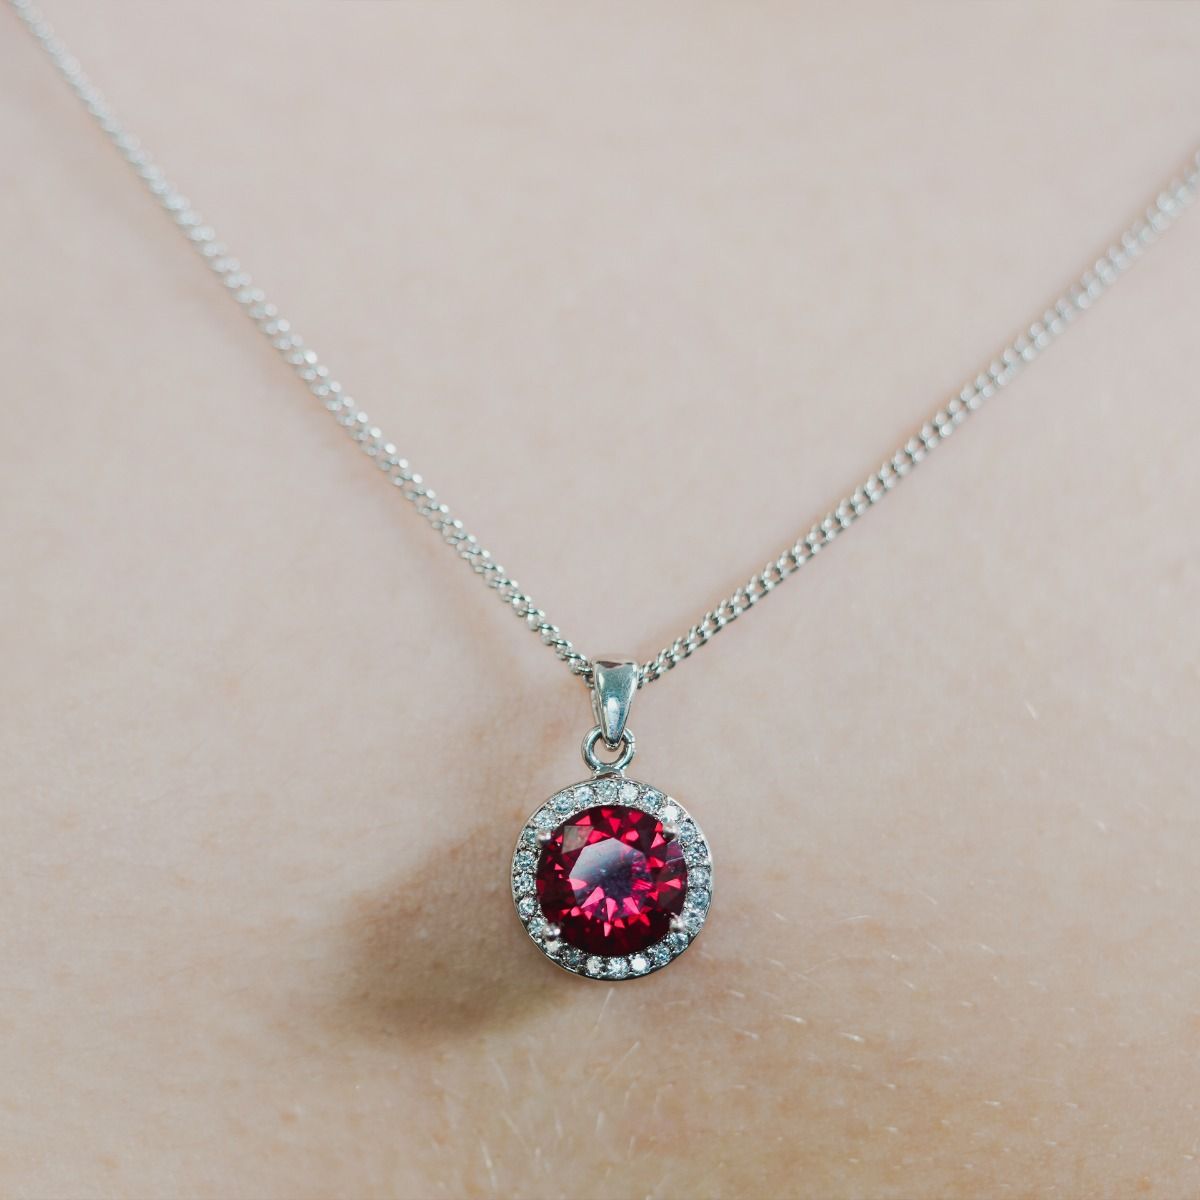 Experience enchantment through our Ruby Halo Pendant. The impressive round-cut centre stone emanates a captivating allure. Effortlessly elevate your style with this exquisite piece, infusing timeless glamour into any ensemble.